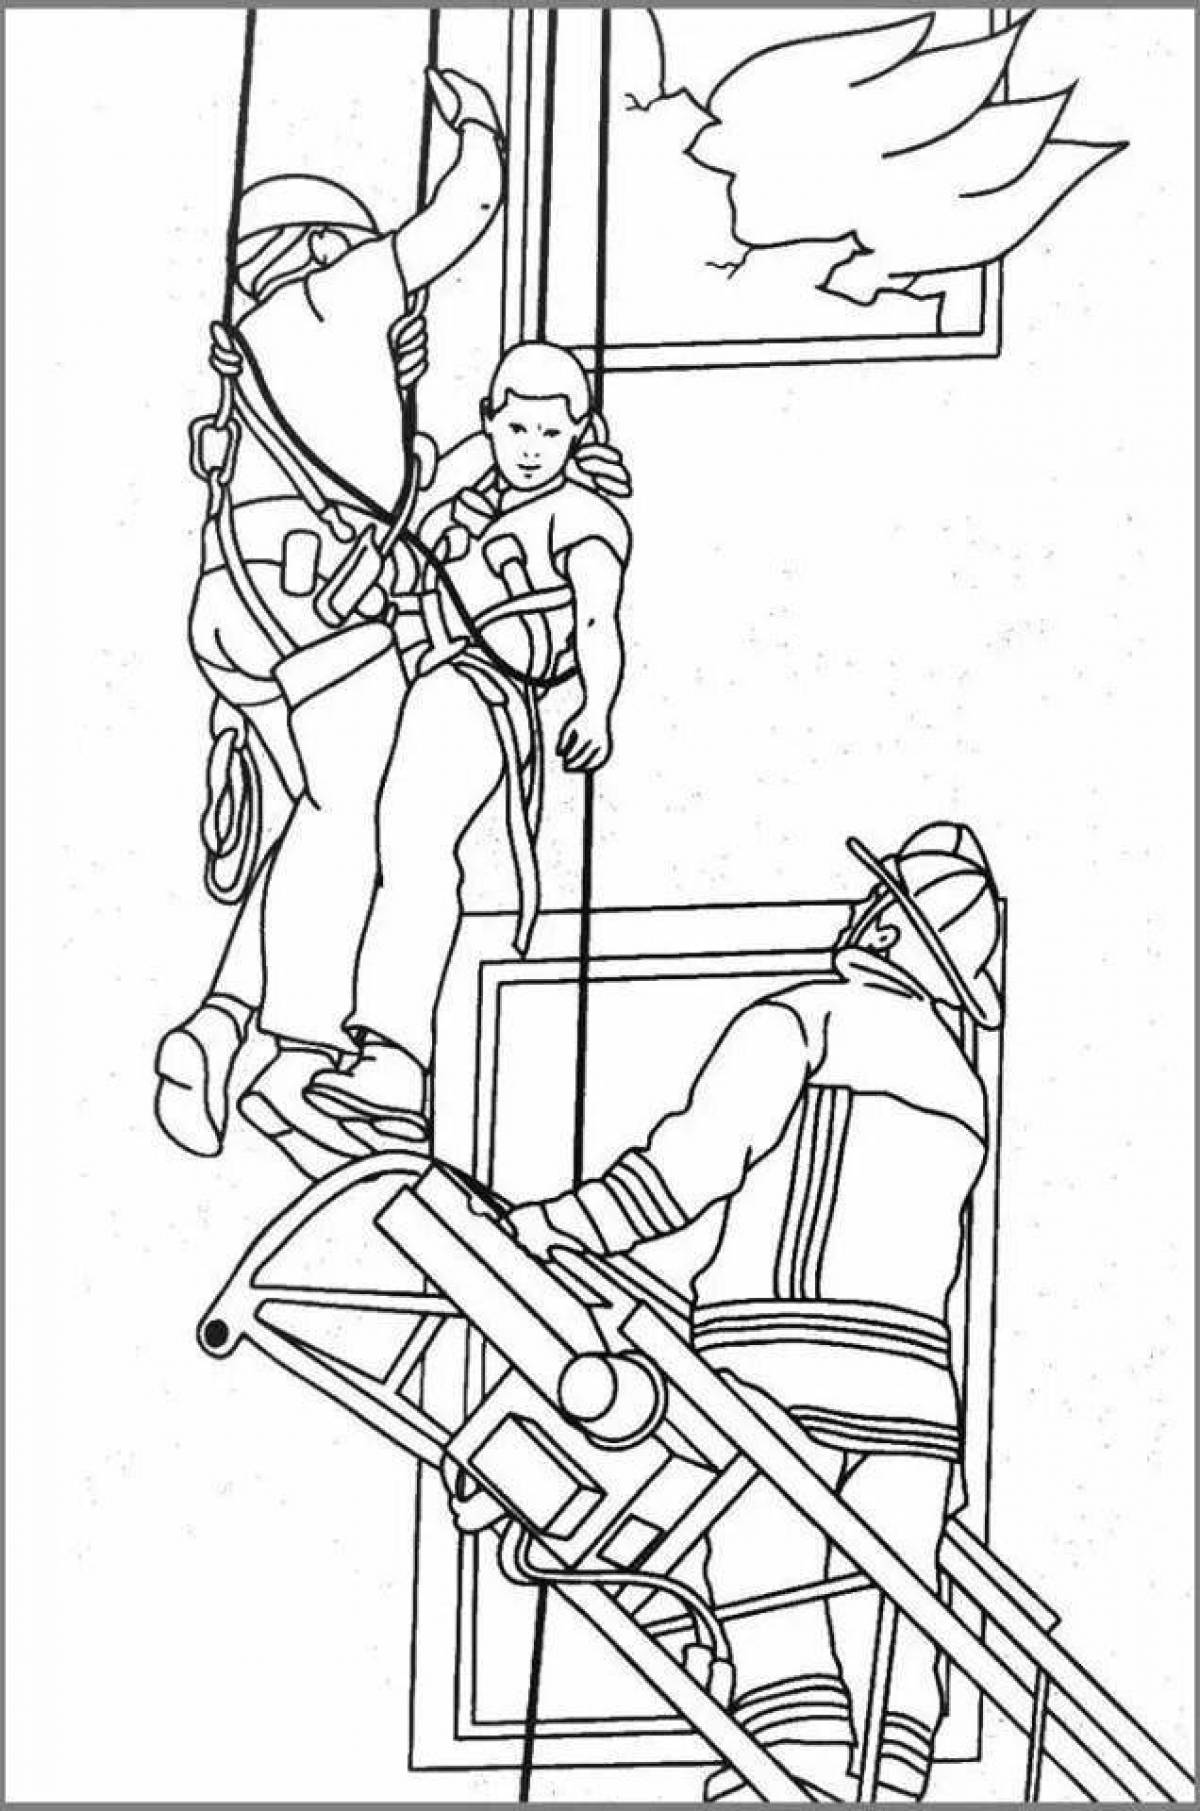 Coloring page fascinating lifeguards